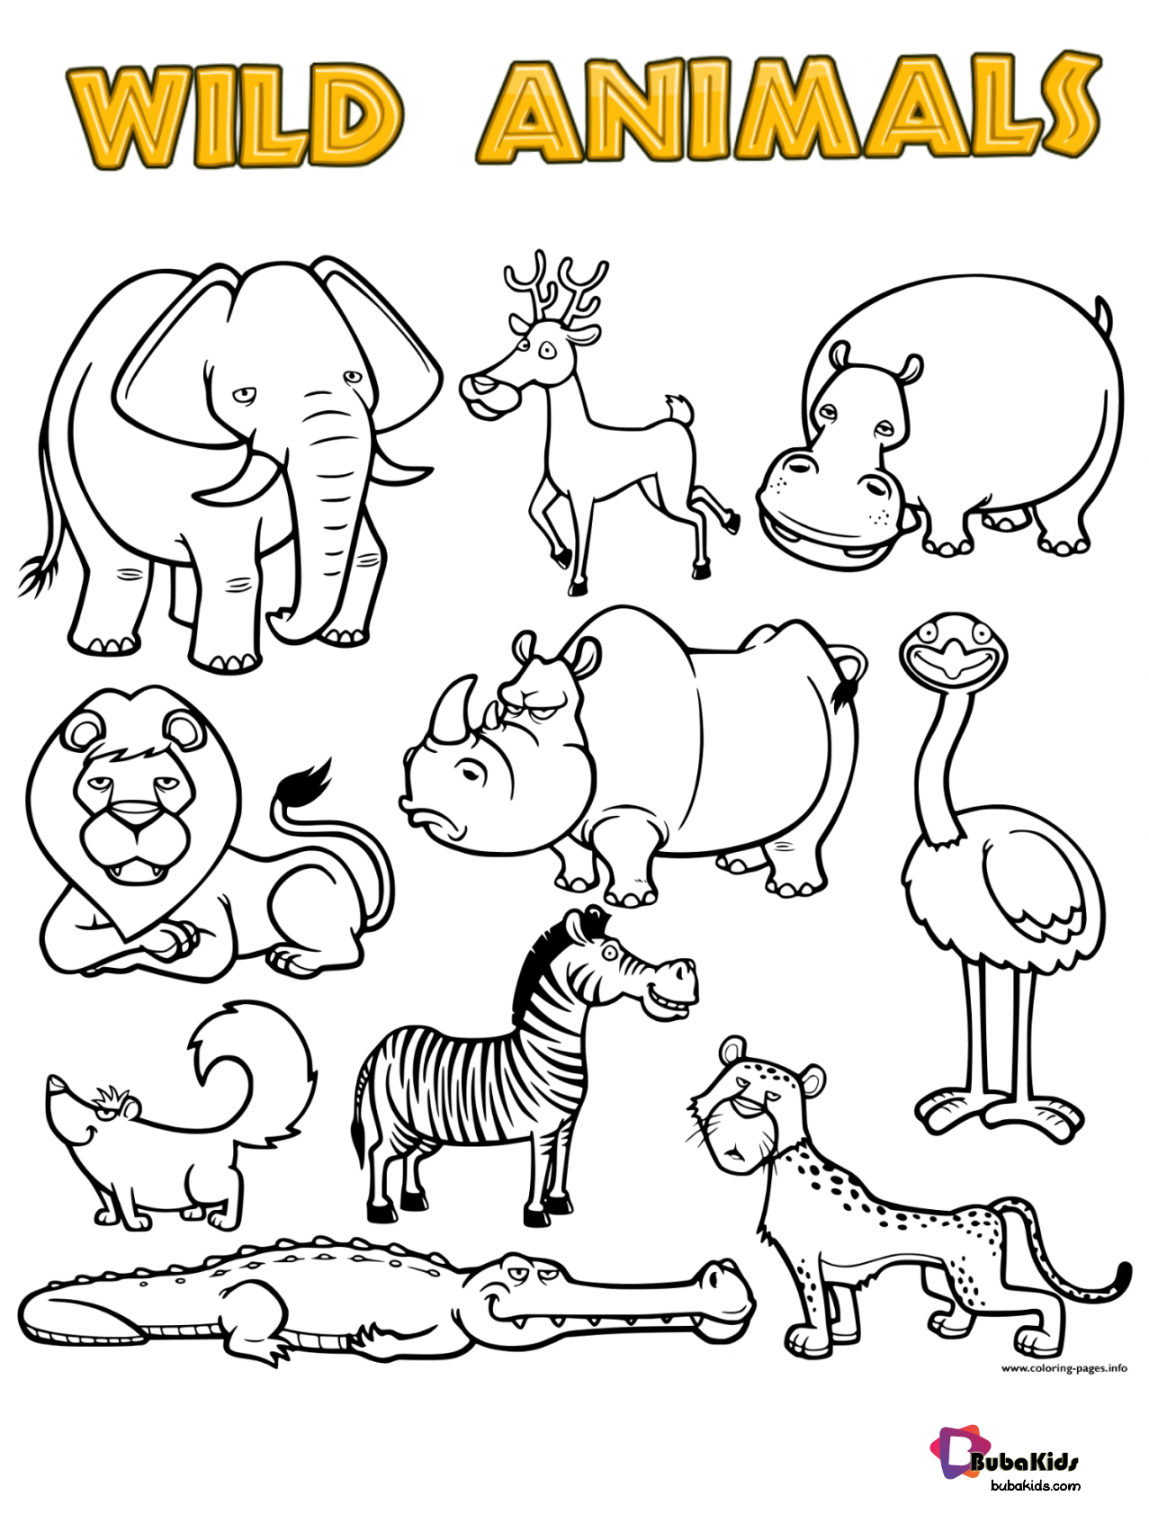 Free download Wild Animals printable coloring page Collection of